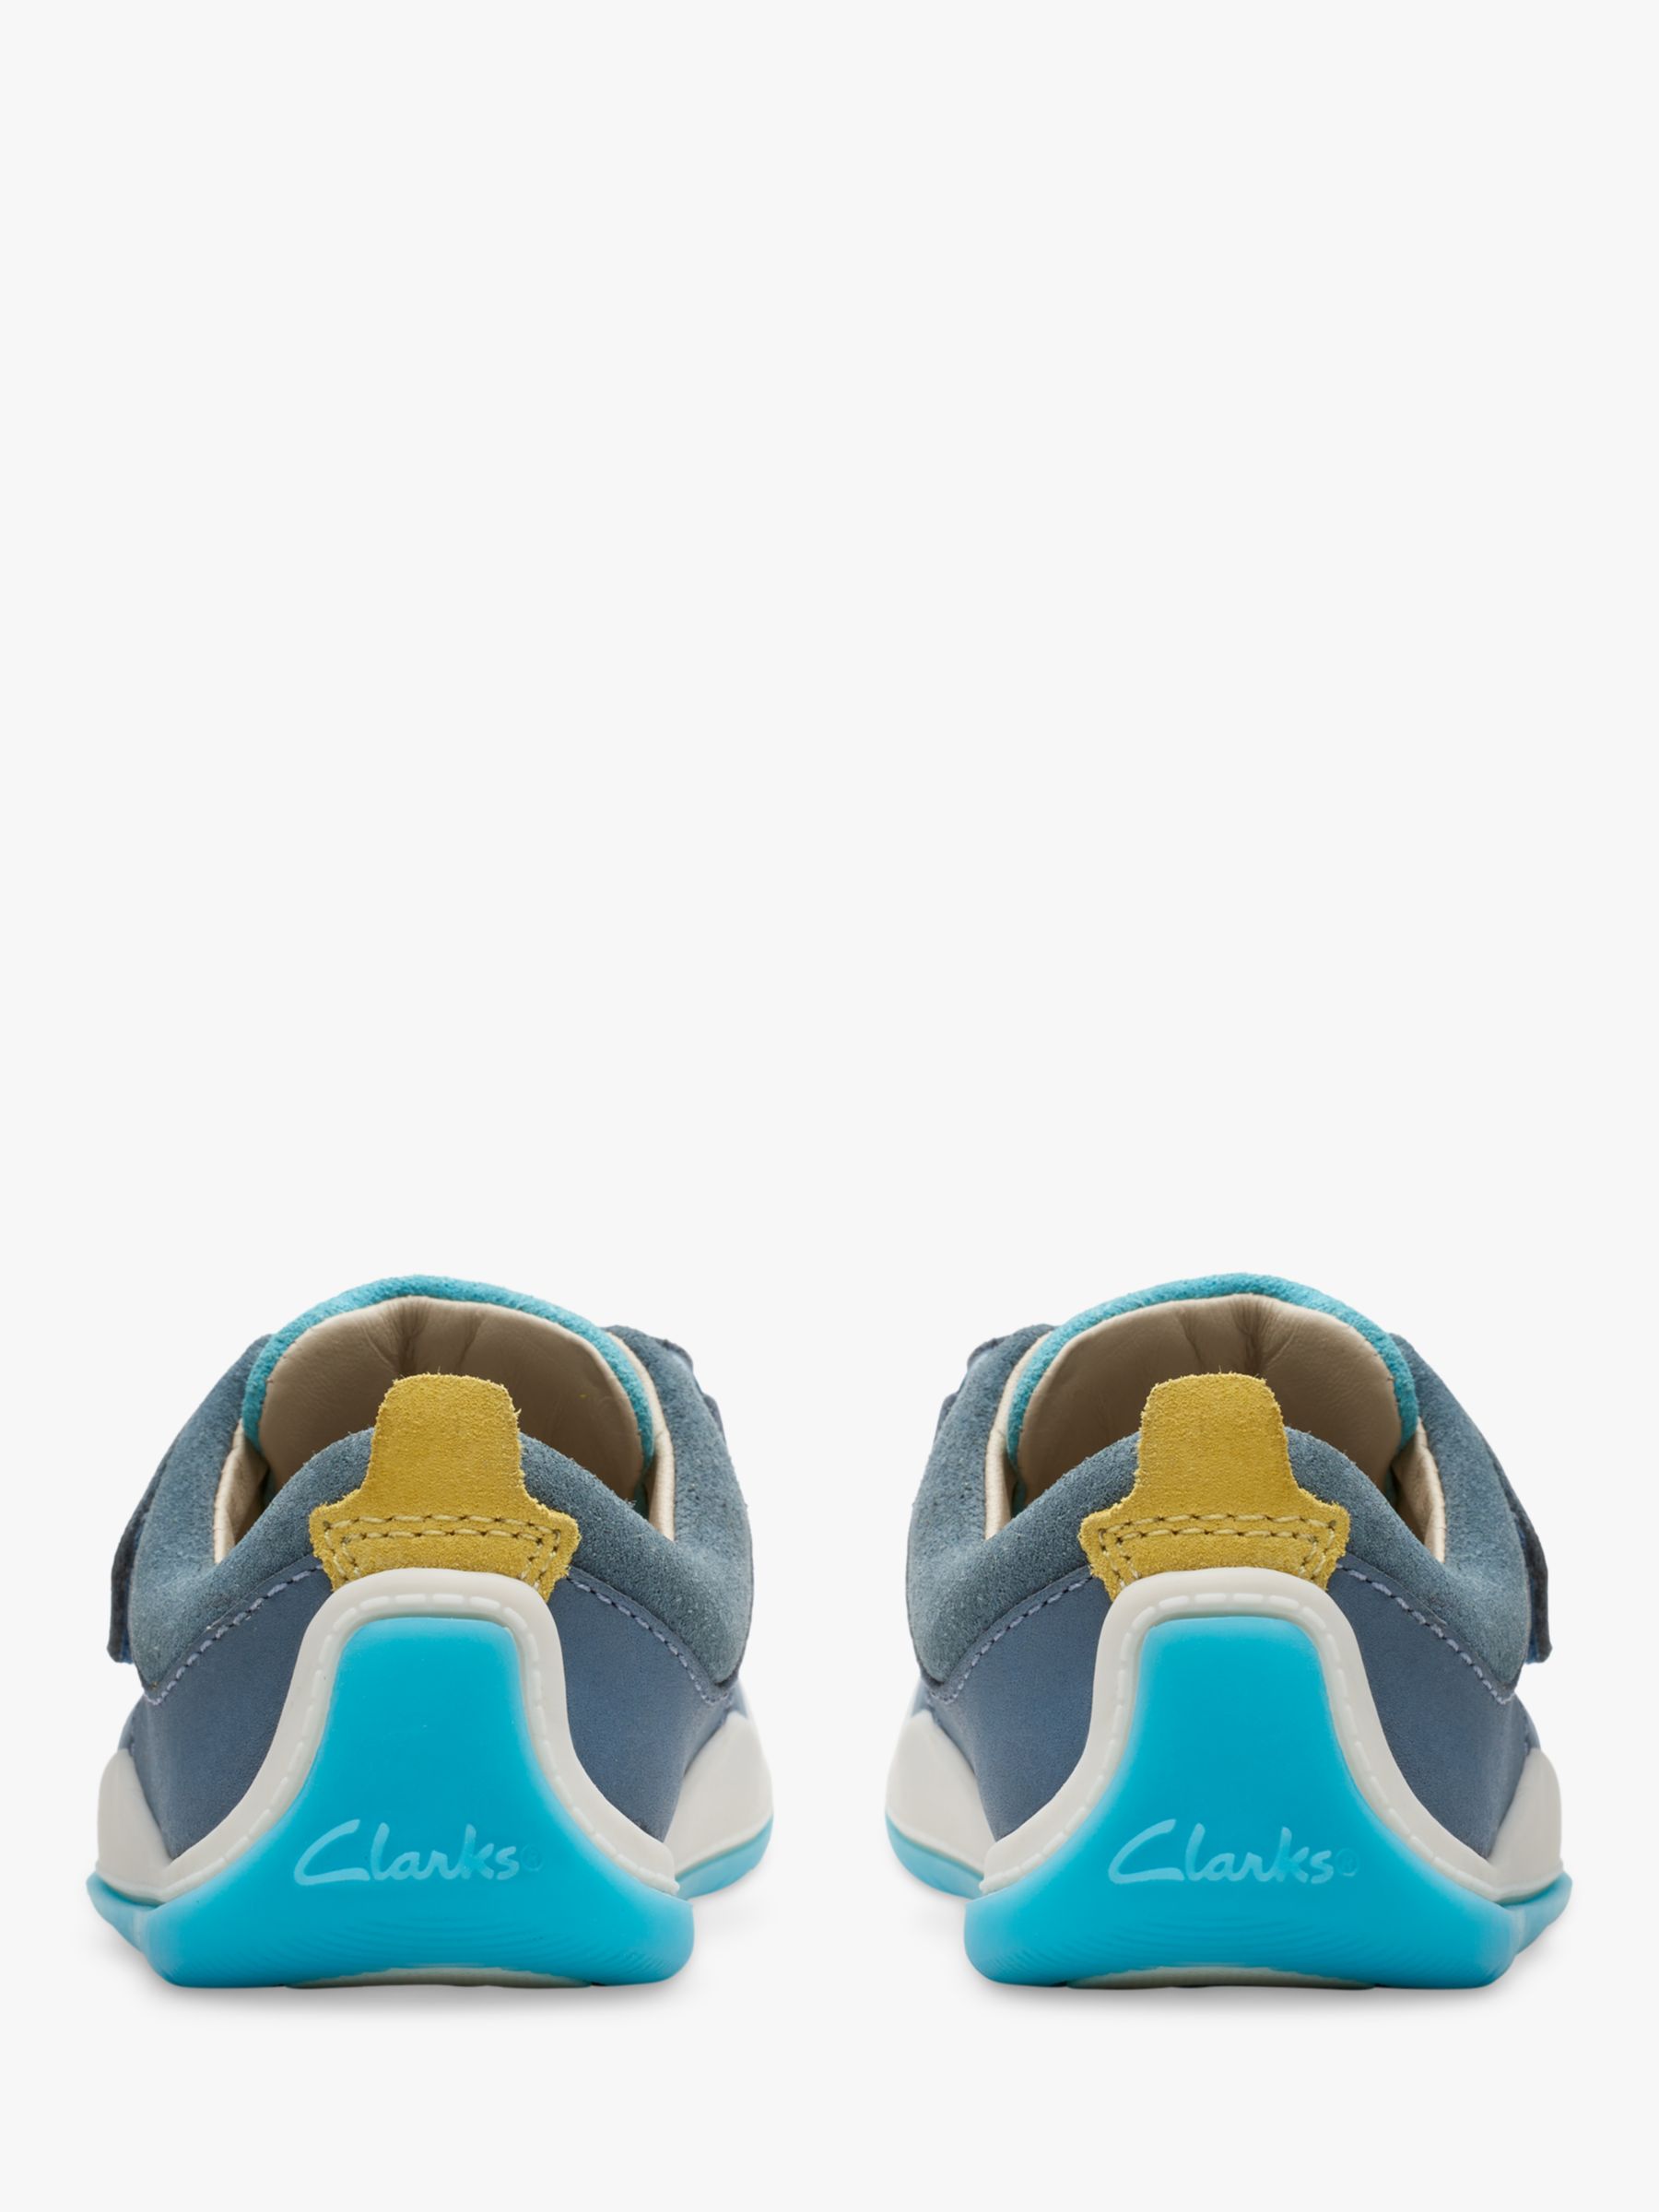 Clarks Baby Roller Fun First Trainers, Steel Blue, 3.5F Jnr